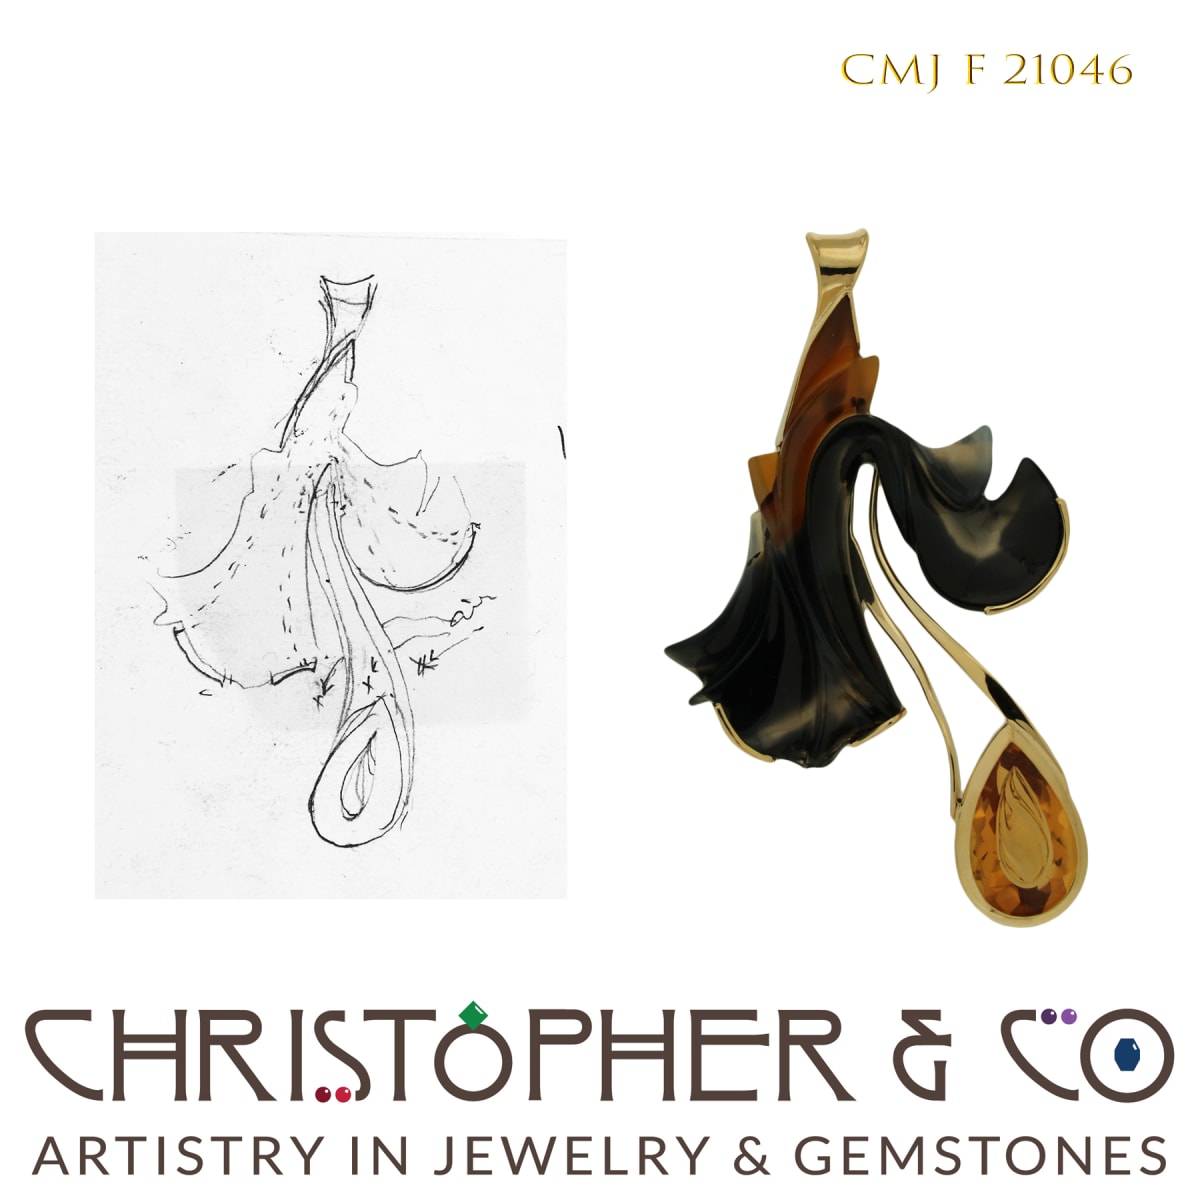 CMJ F 21046 Gold Pendant by Christopher M. Jupp set with handcarved Agate and Citrine by Darryl Alexander  Image: CMJ F 21046 Gold Pendant by Christopher M. Jupp set with handcarved Agate and Citrine by Darryl Alexander